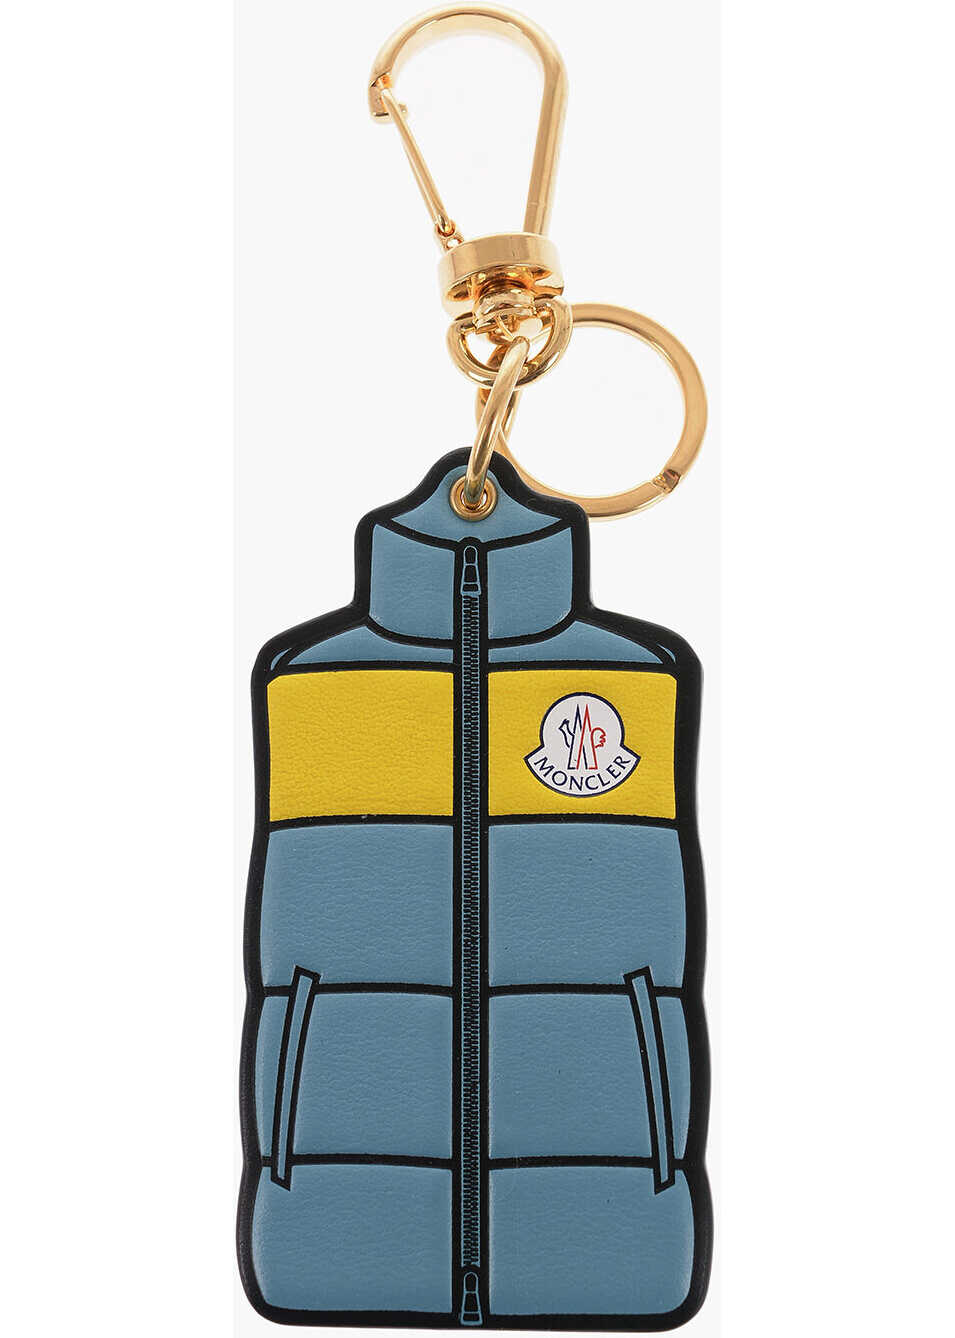 Moncler Keyring With Leather Pendant Blue